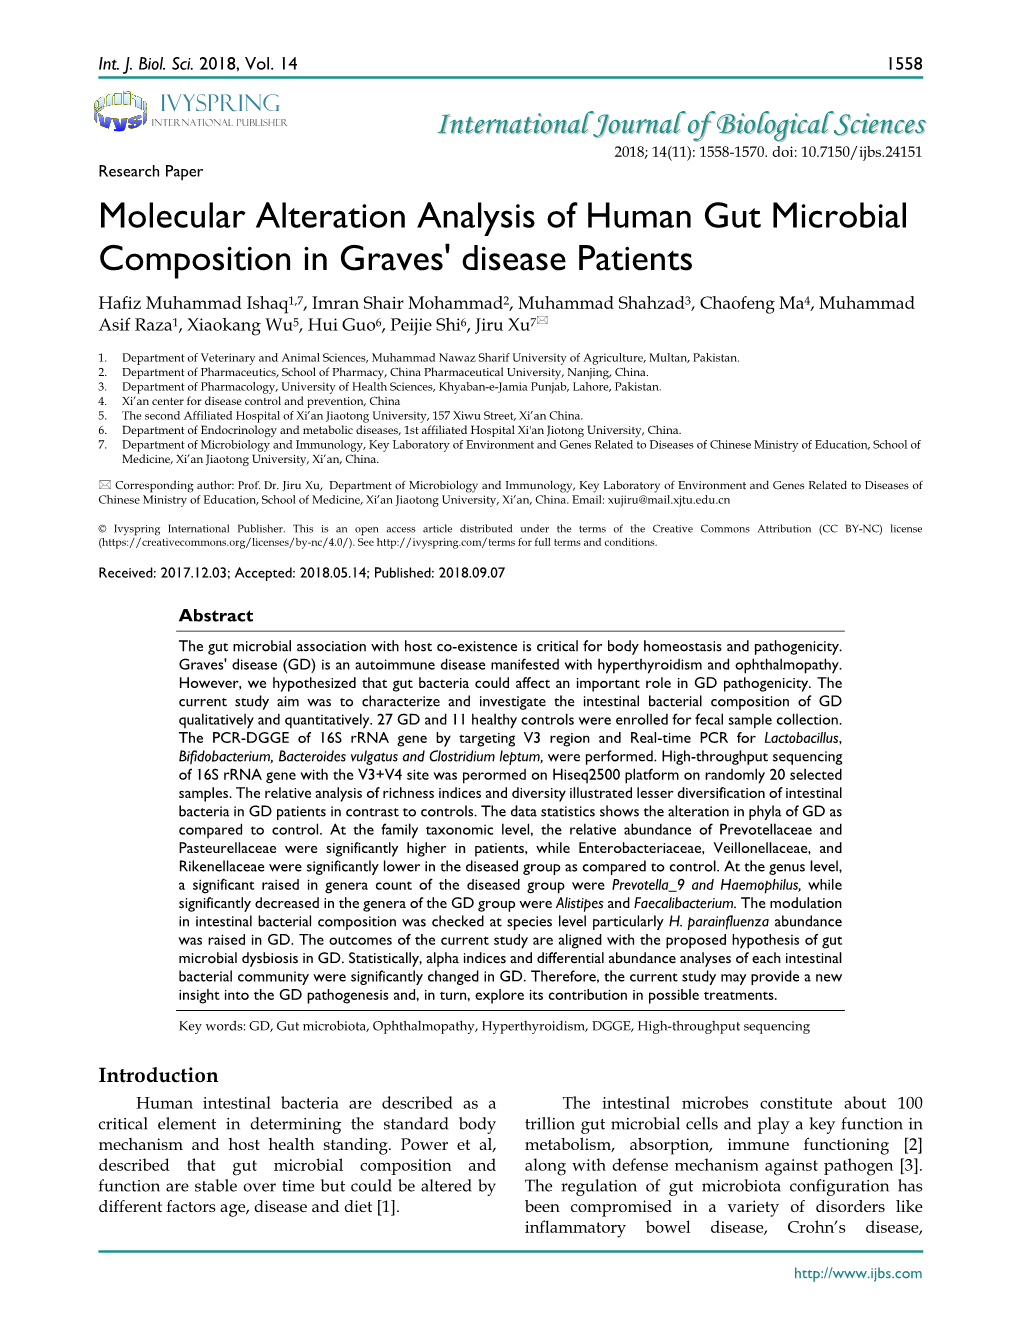 Molecular Alteration Analysis of Human Gut Microbial Composition